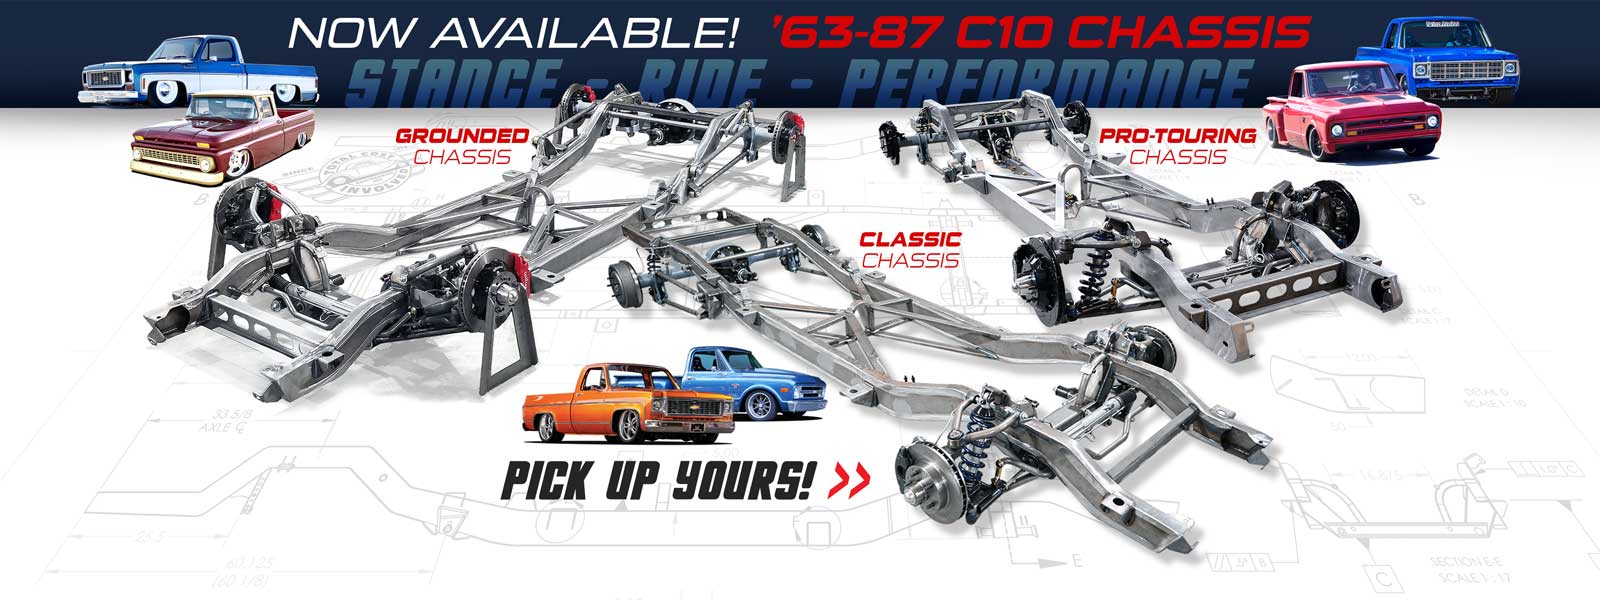 1963-1987 C10 Chassis Lineup 1600x600